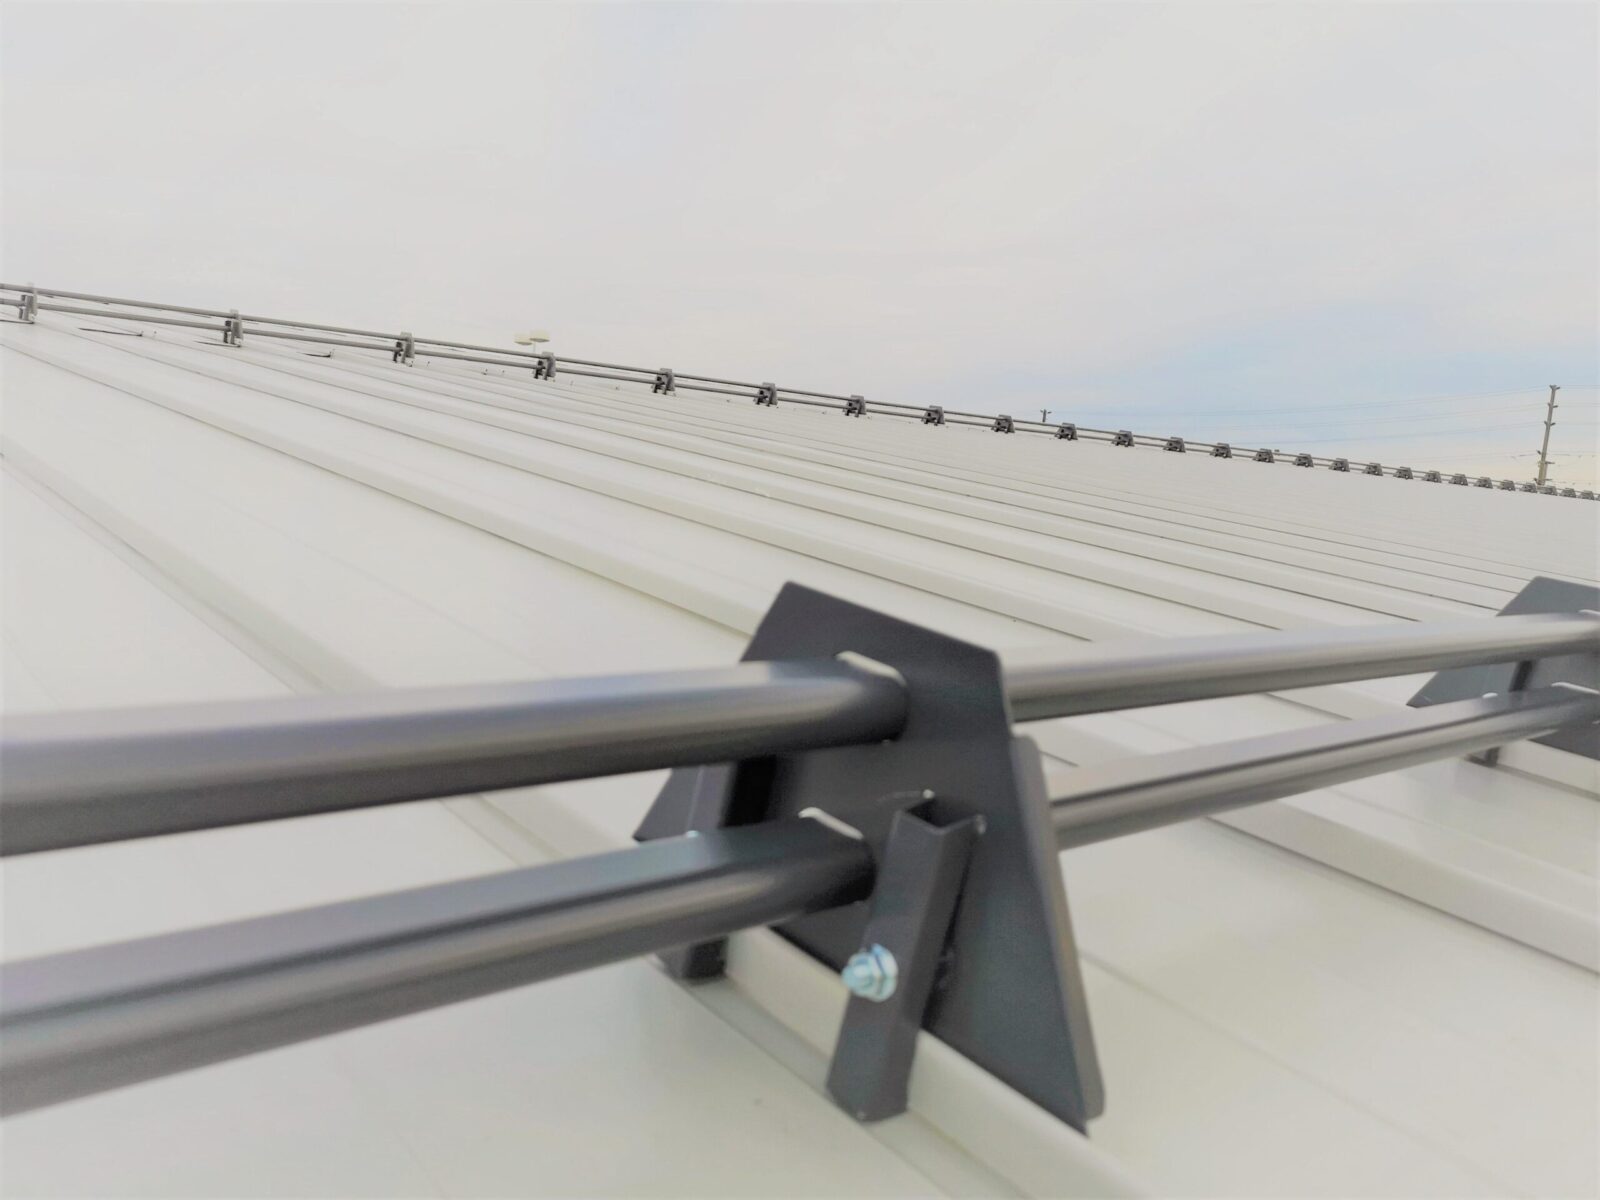 Install Tubular Snow guards on Standing Seam Metal Roof in North America